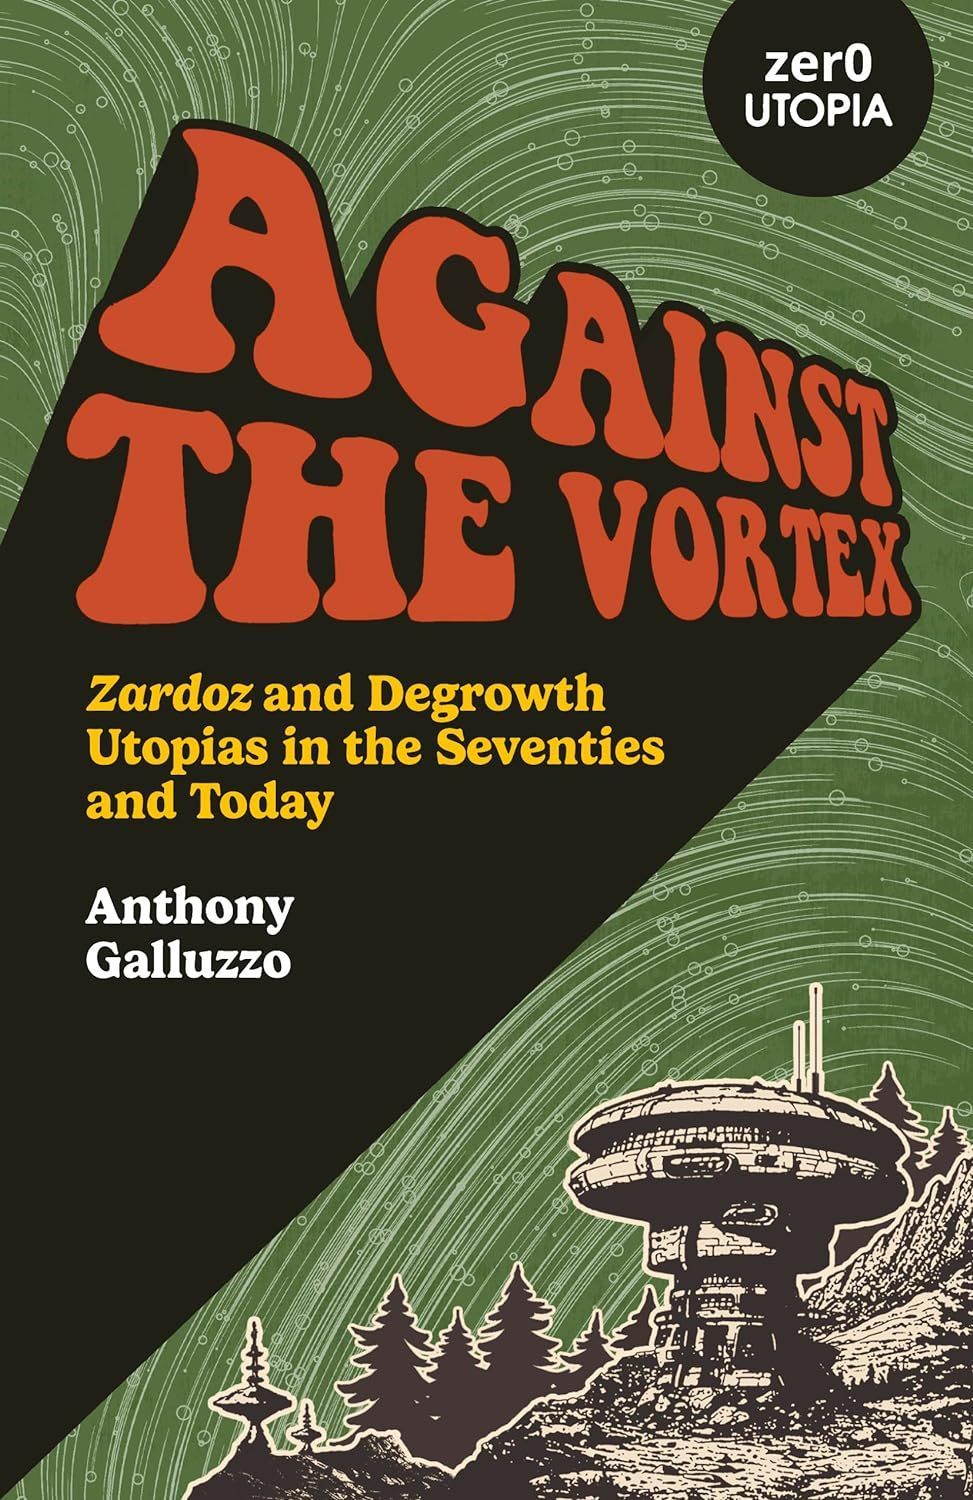 Twilight of the Floating Idol: On Anthony Galluzzo’s “Against the Vortex”